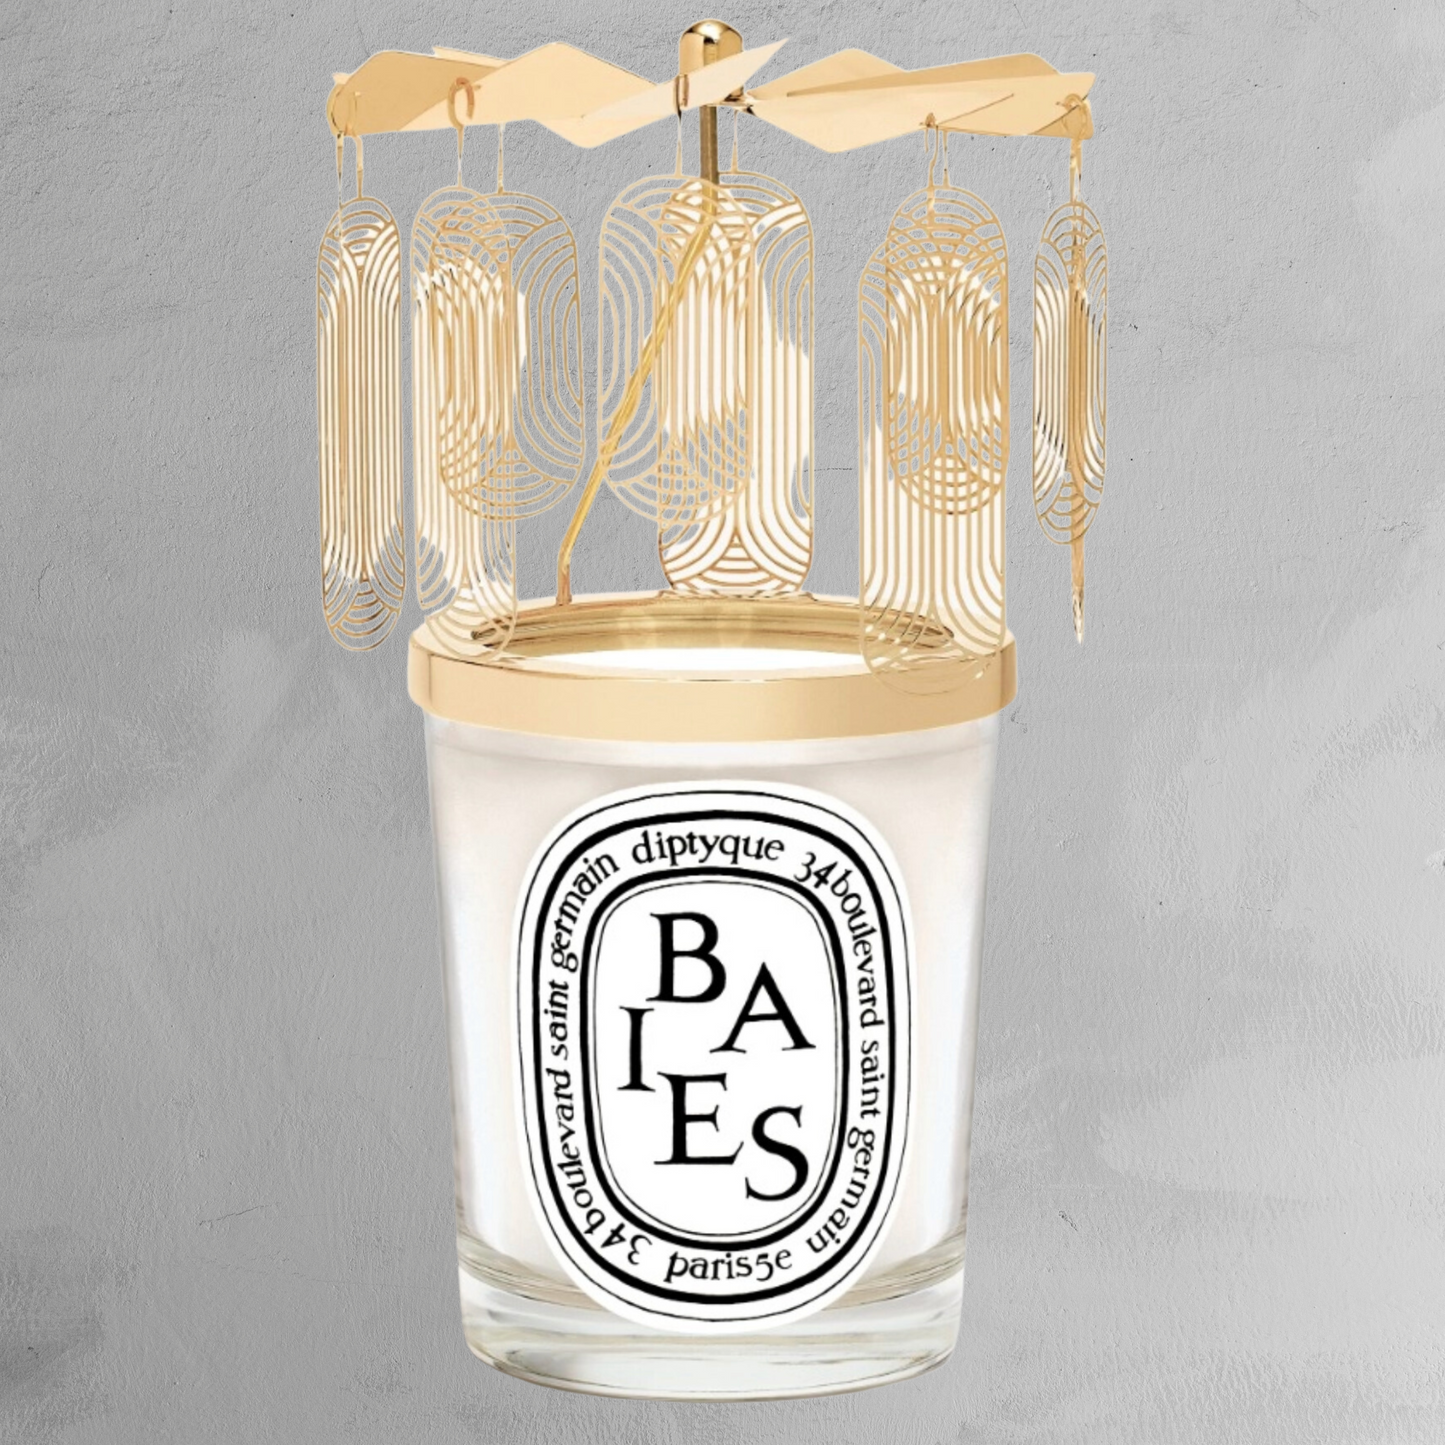 Diptyque - Holiday Carousel - Baies - Limited Edition